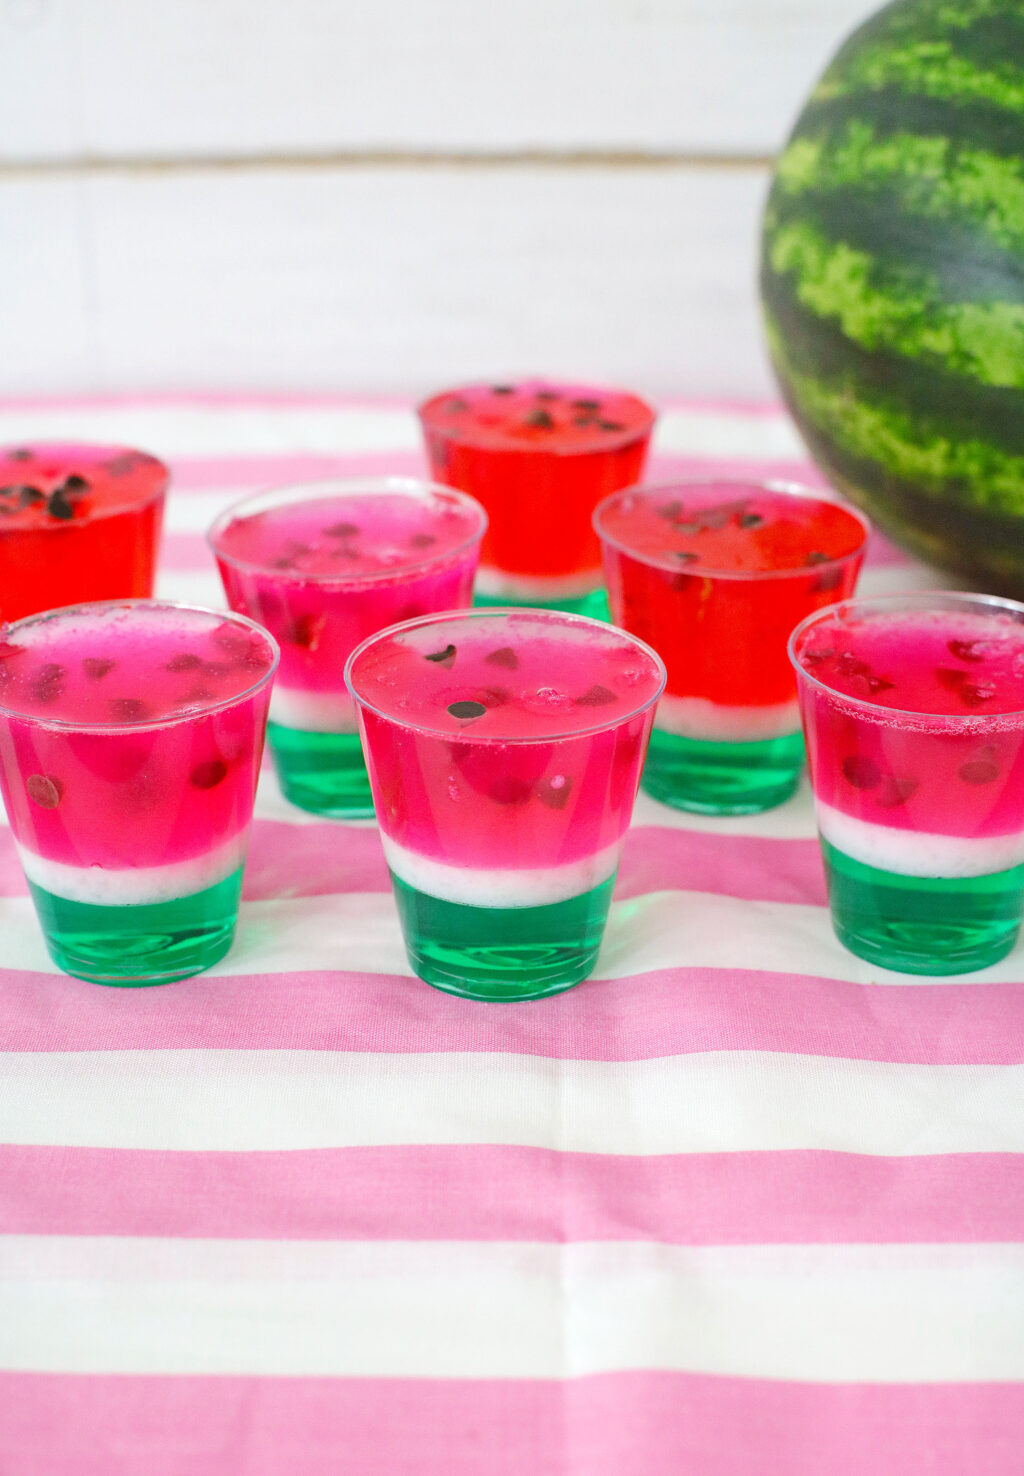 watermelon jello shots on pink cloth on table